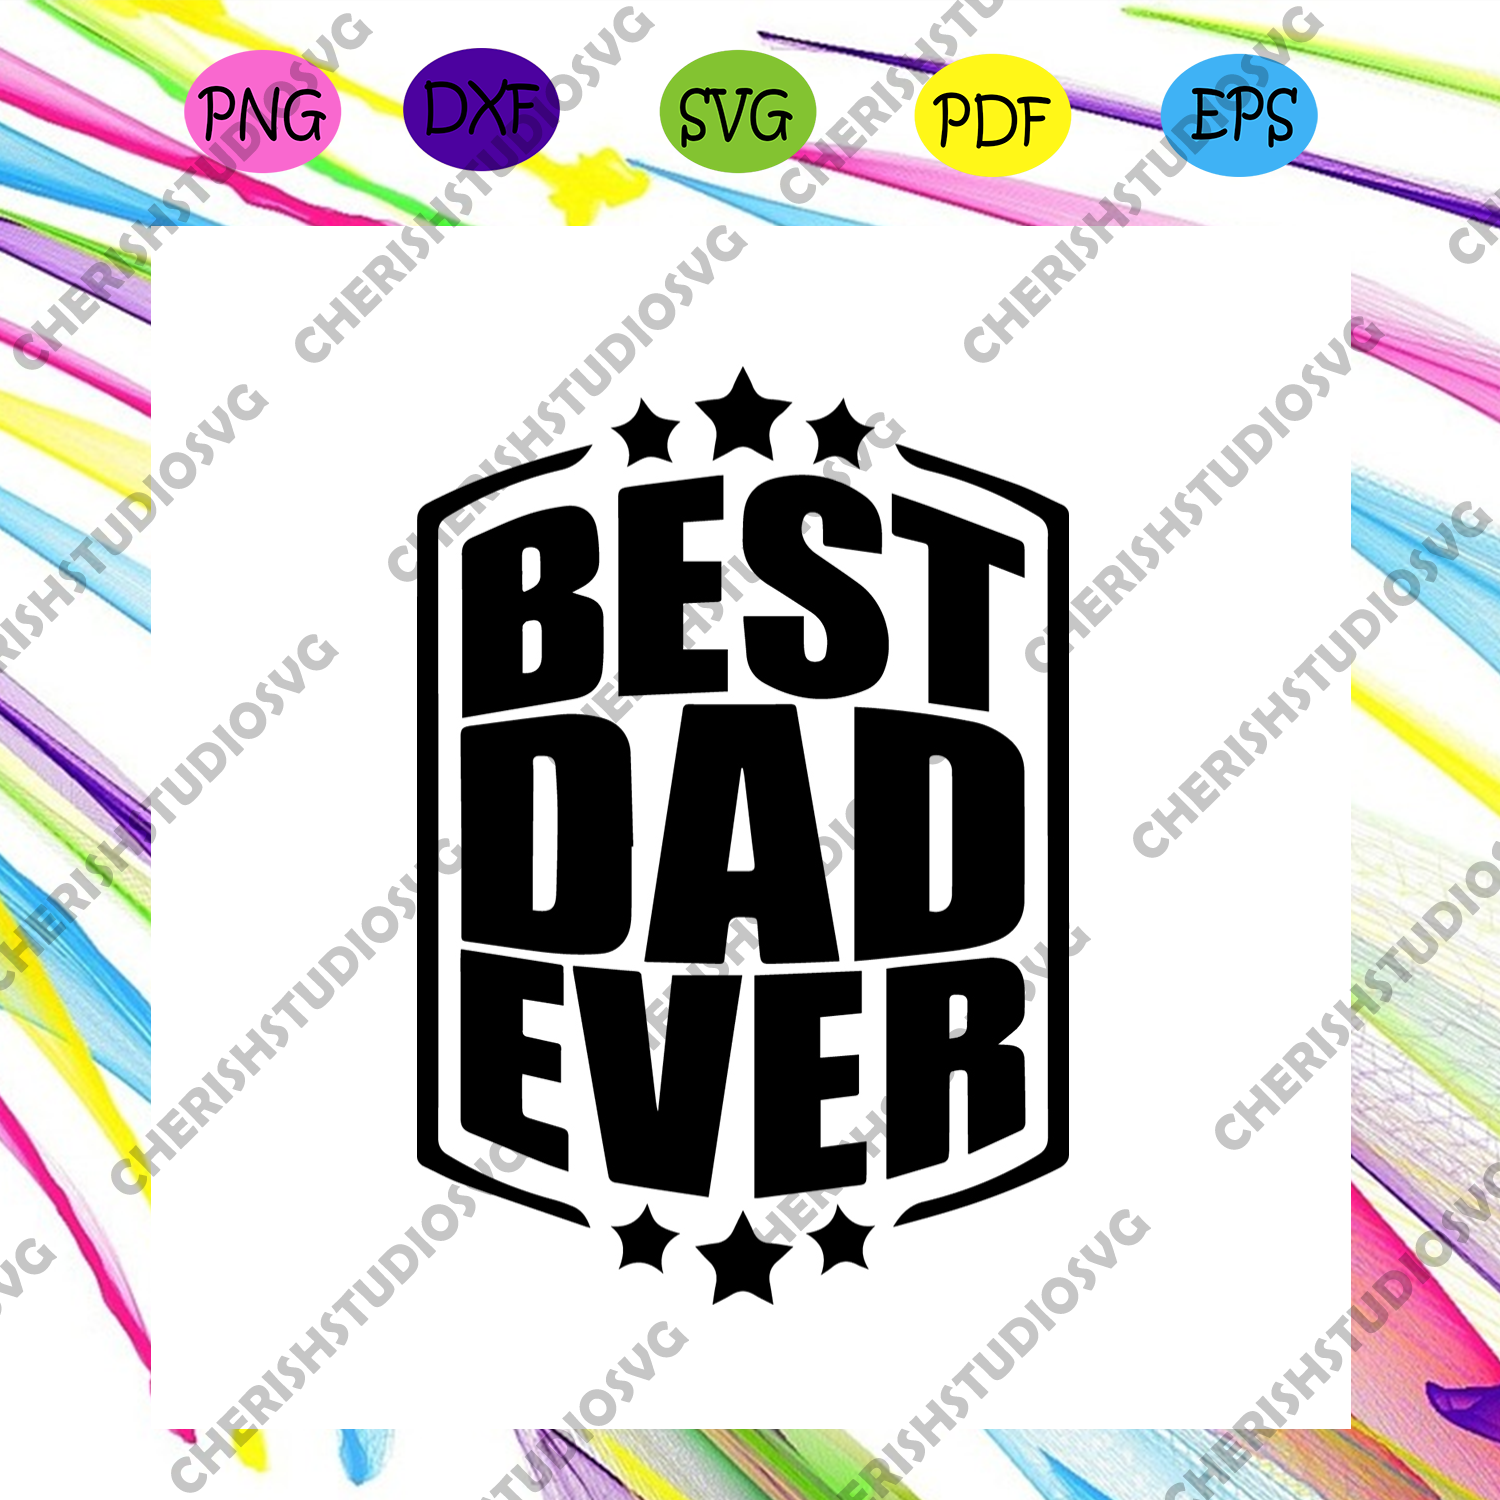 Download Best Dad Ever Svg Fathers Day Svg Best Dad Svg Best Ever Svg Fathe Cherishsvgstudio